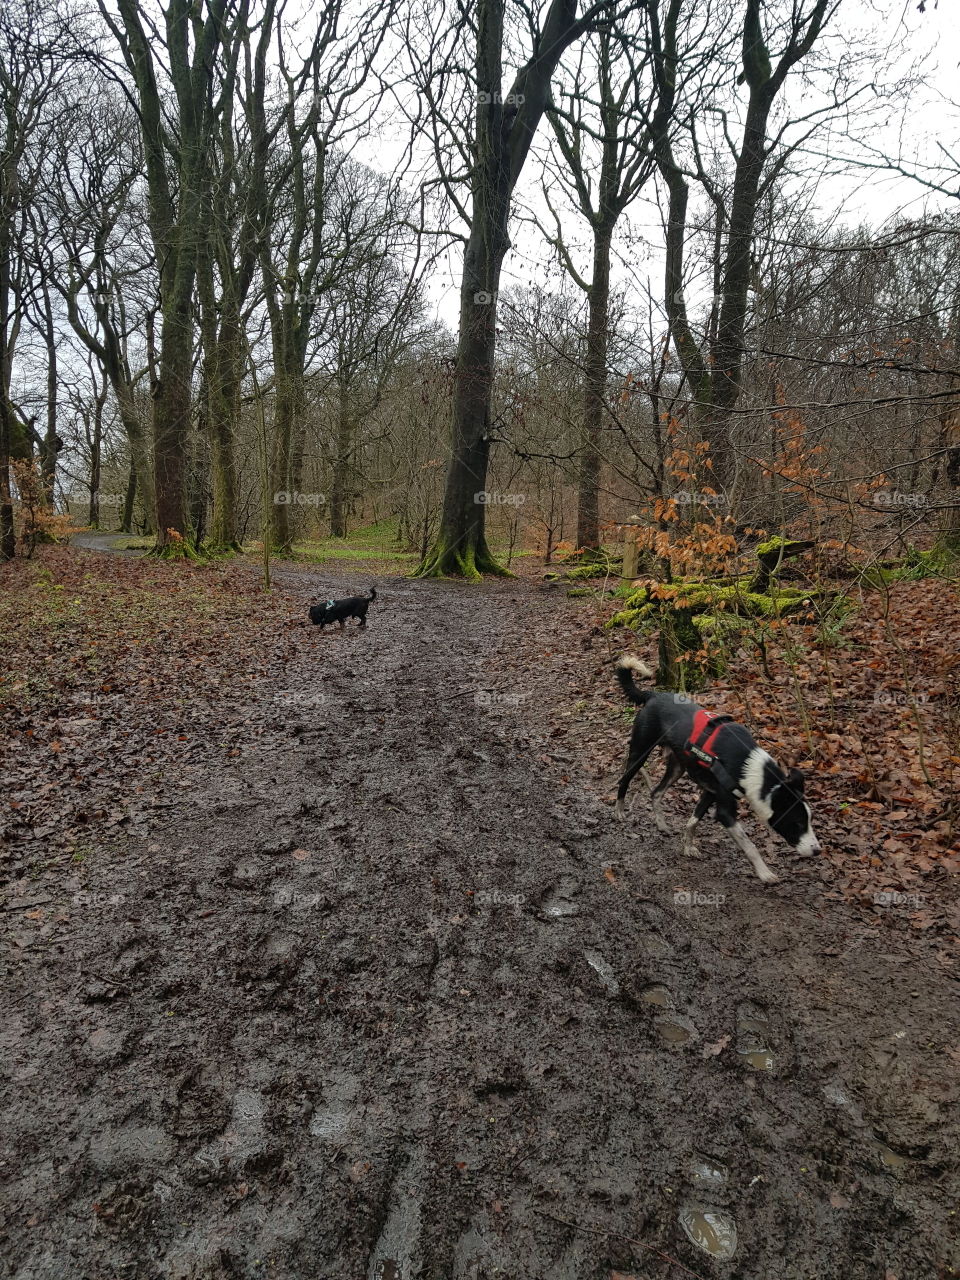 Max (border collie) and Mowgli (Cavalier) out for a wee stroll in the Scottish Woodlands, loving life